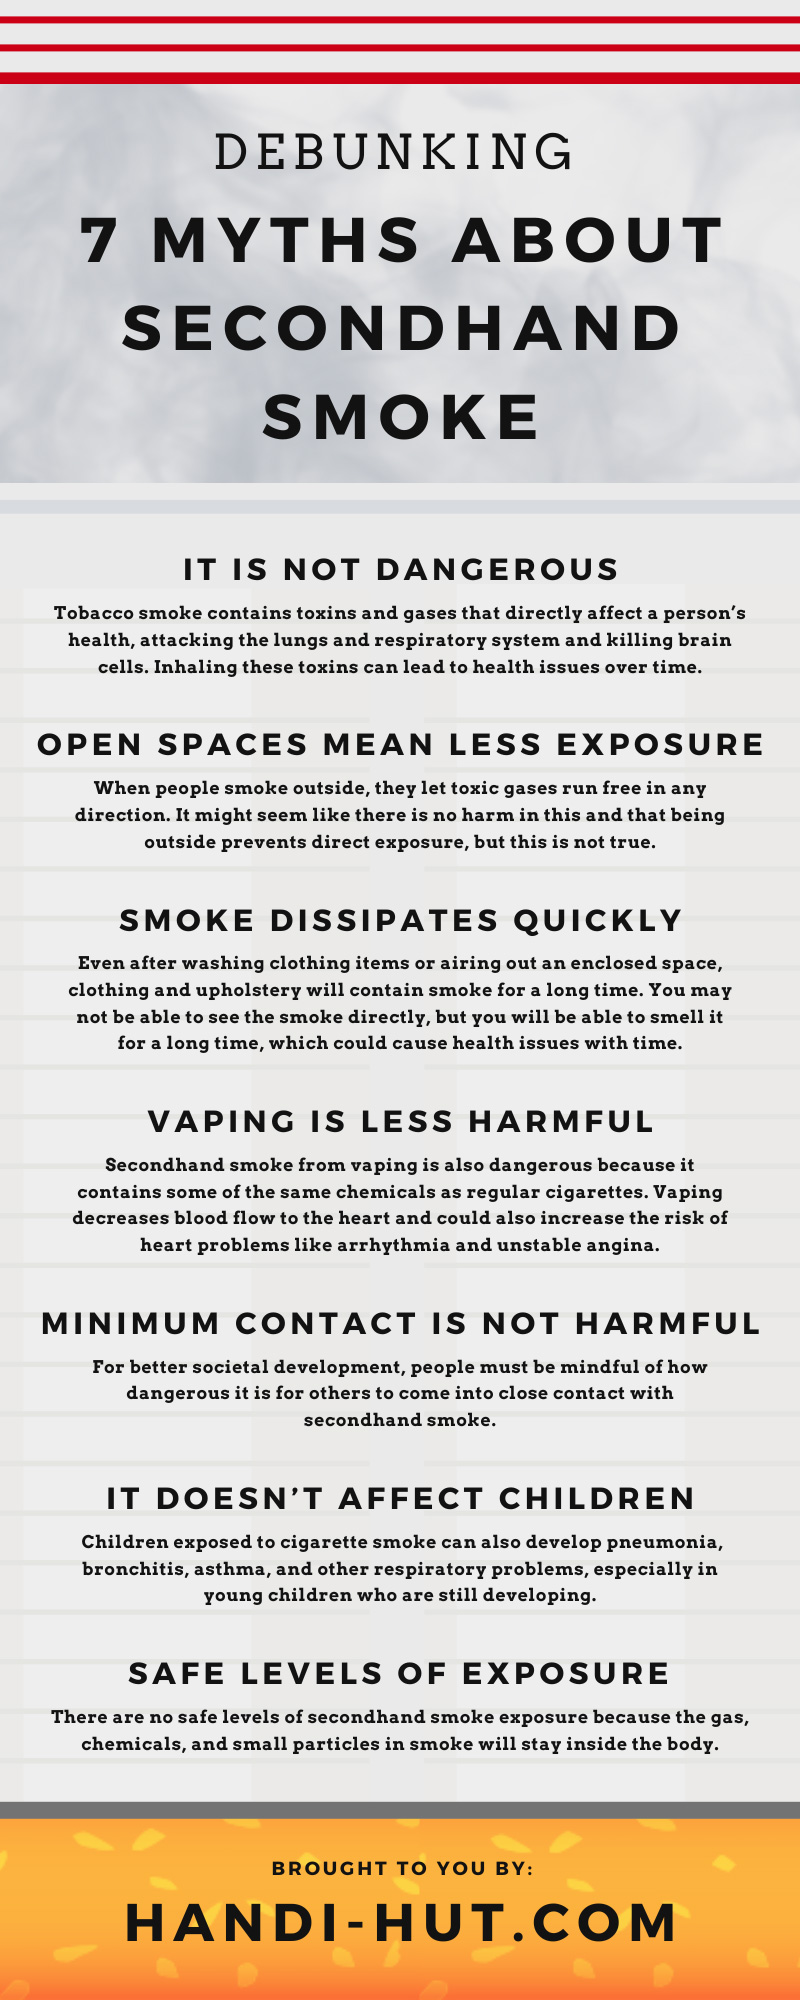 Debunking 7 Myths About Secondhand Smoke 